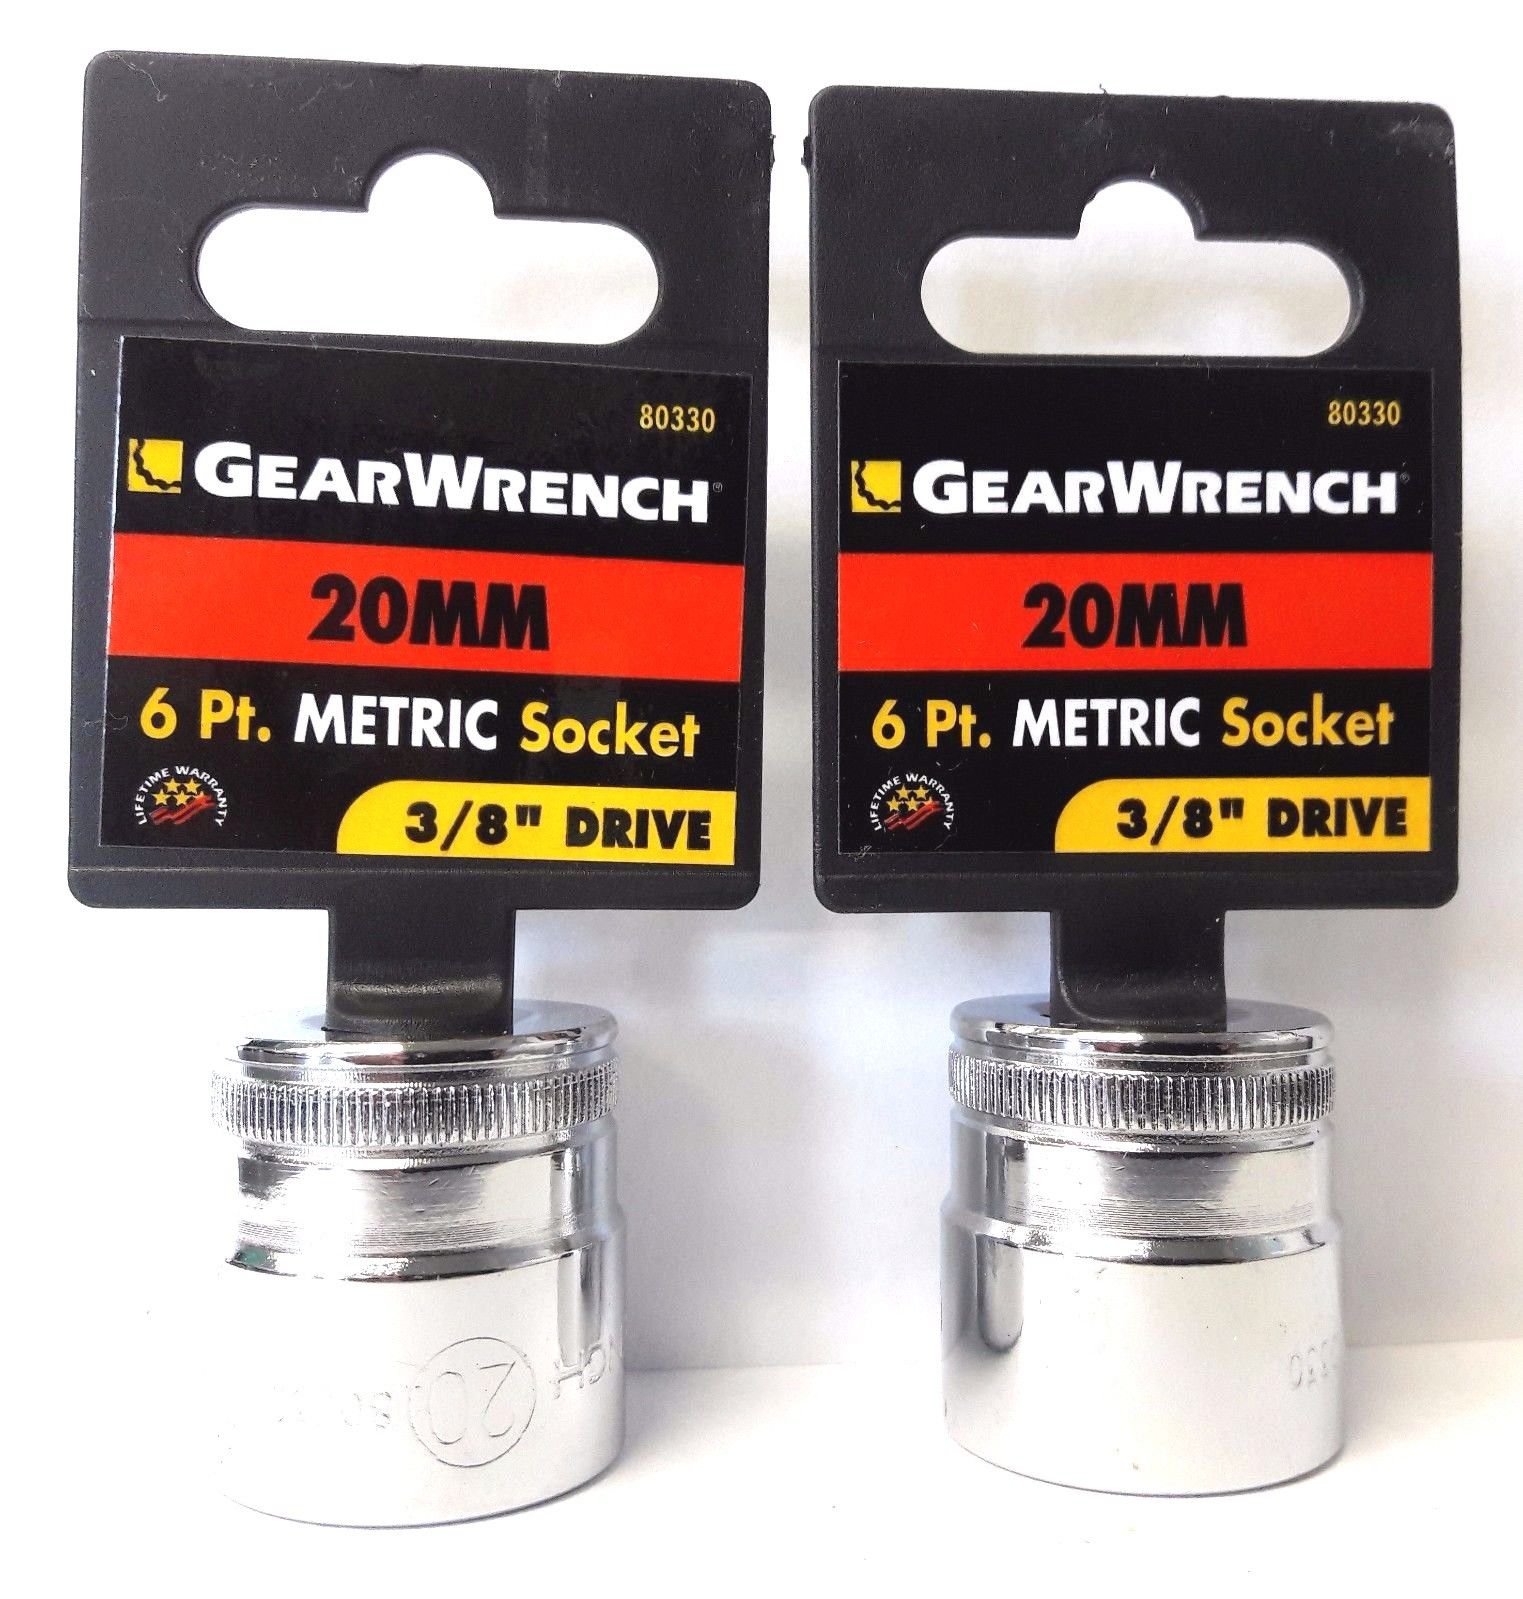 GearWrench 80330 3/8" Drive 20mm 6 Point Socket 2PCS